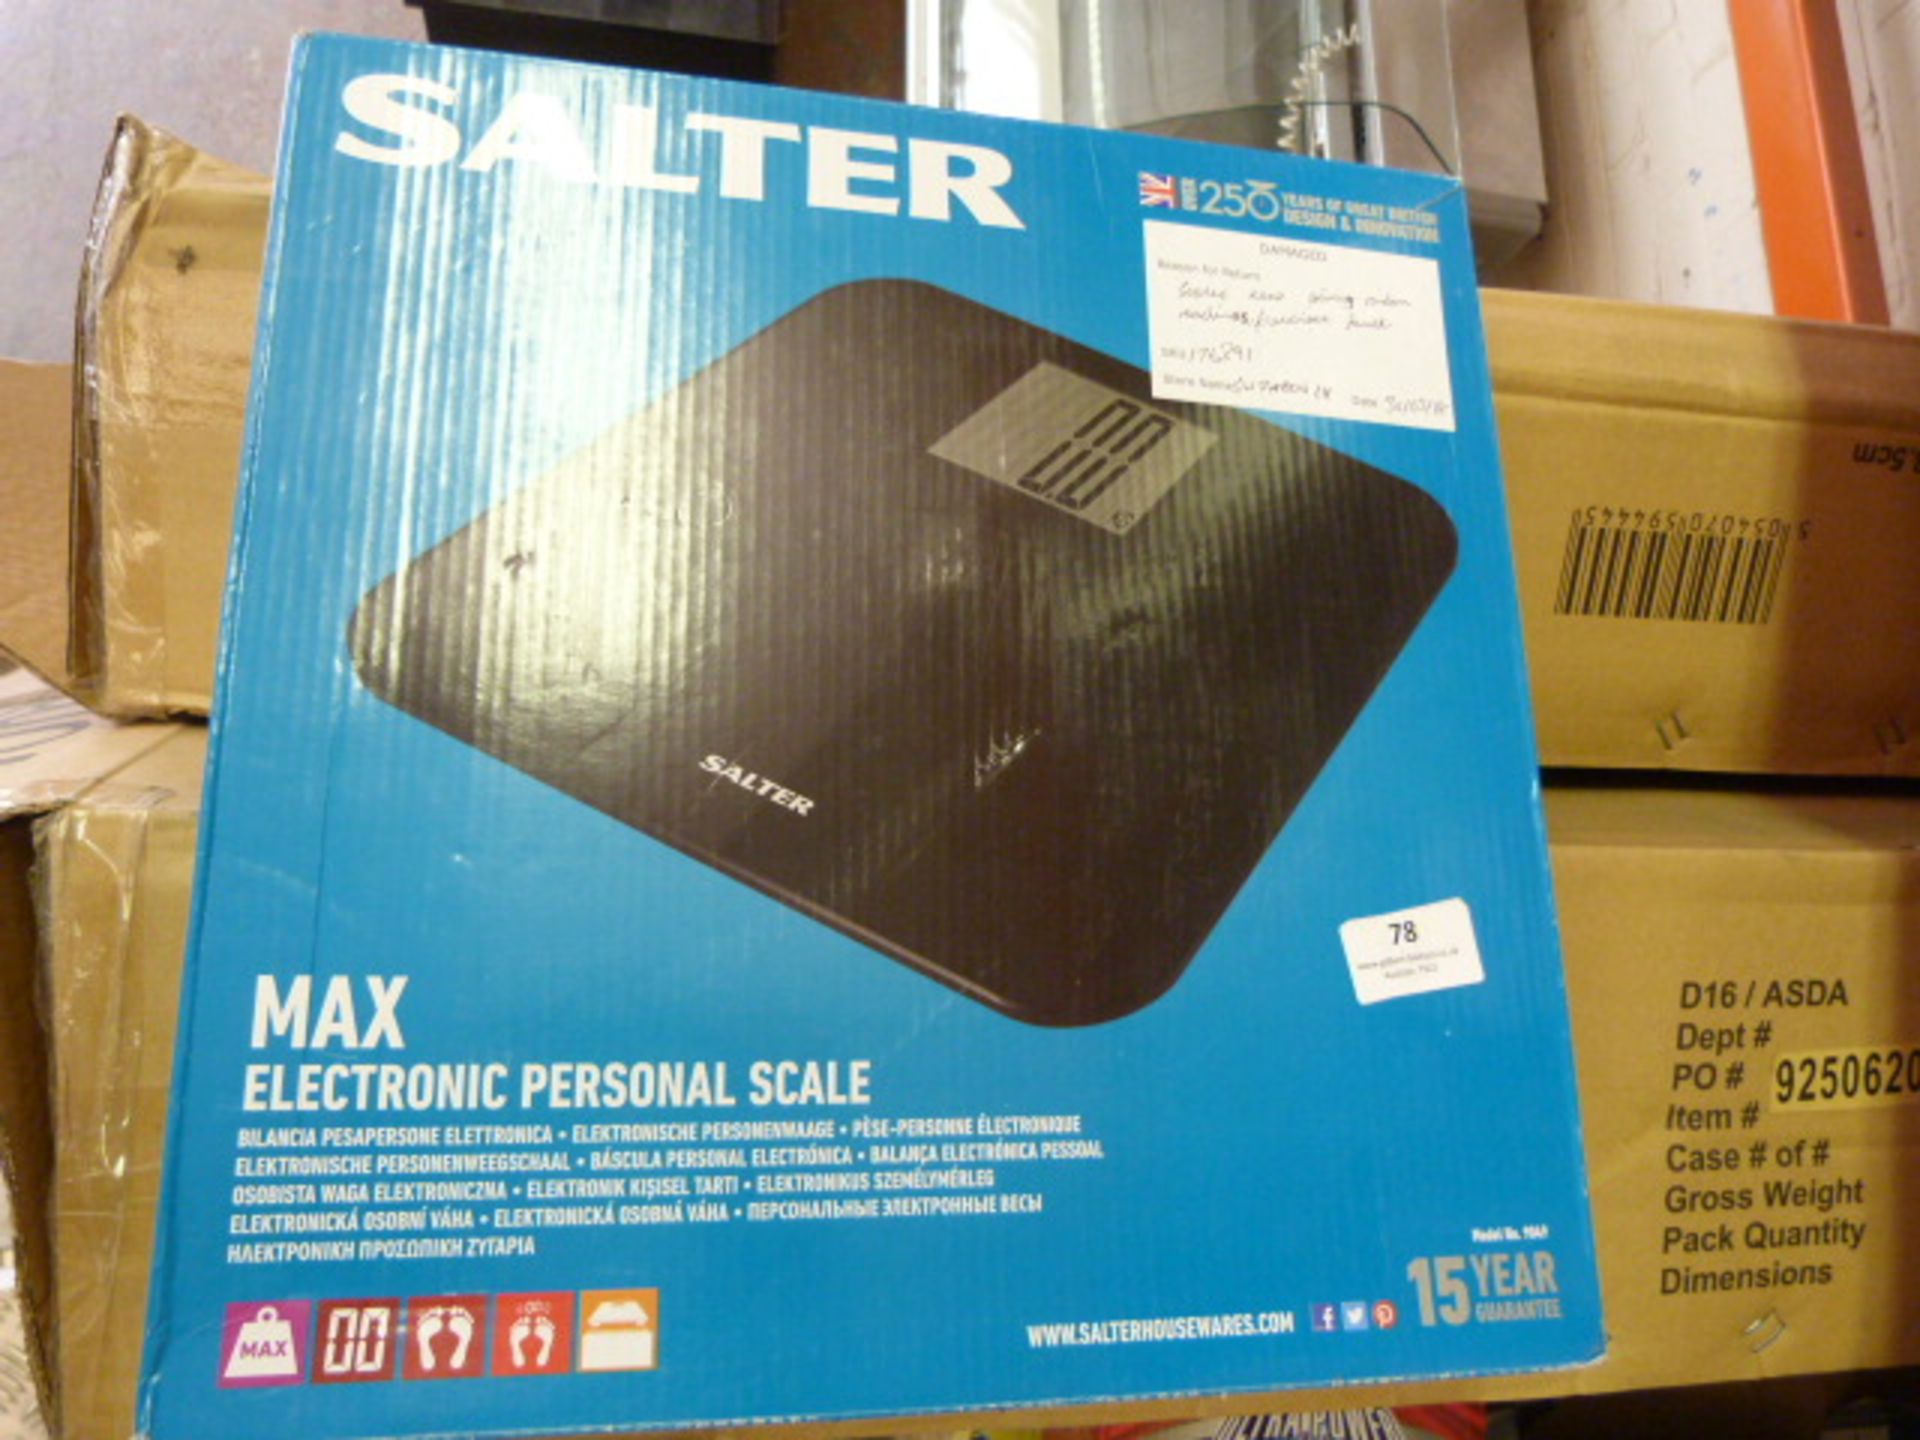 *Salter Max Electronic Personal Scale